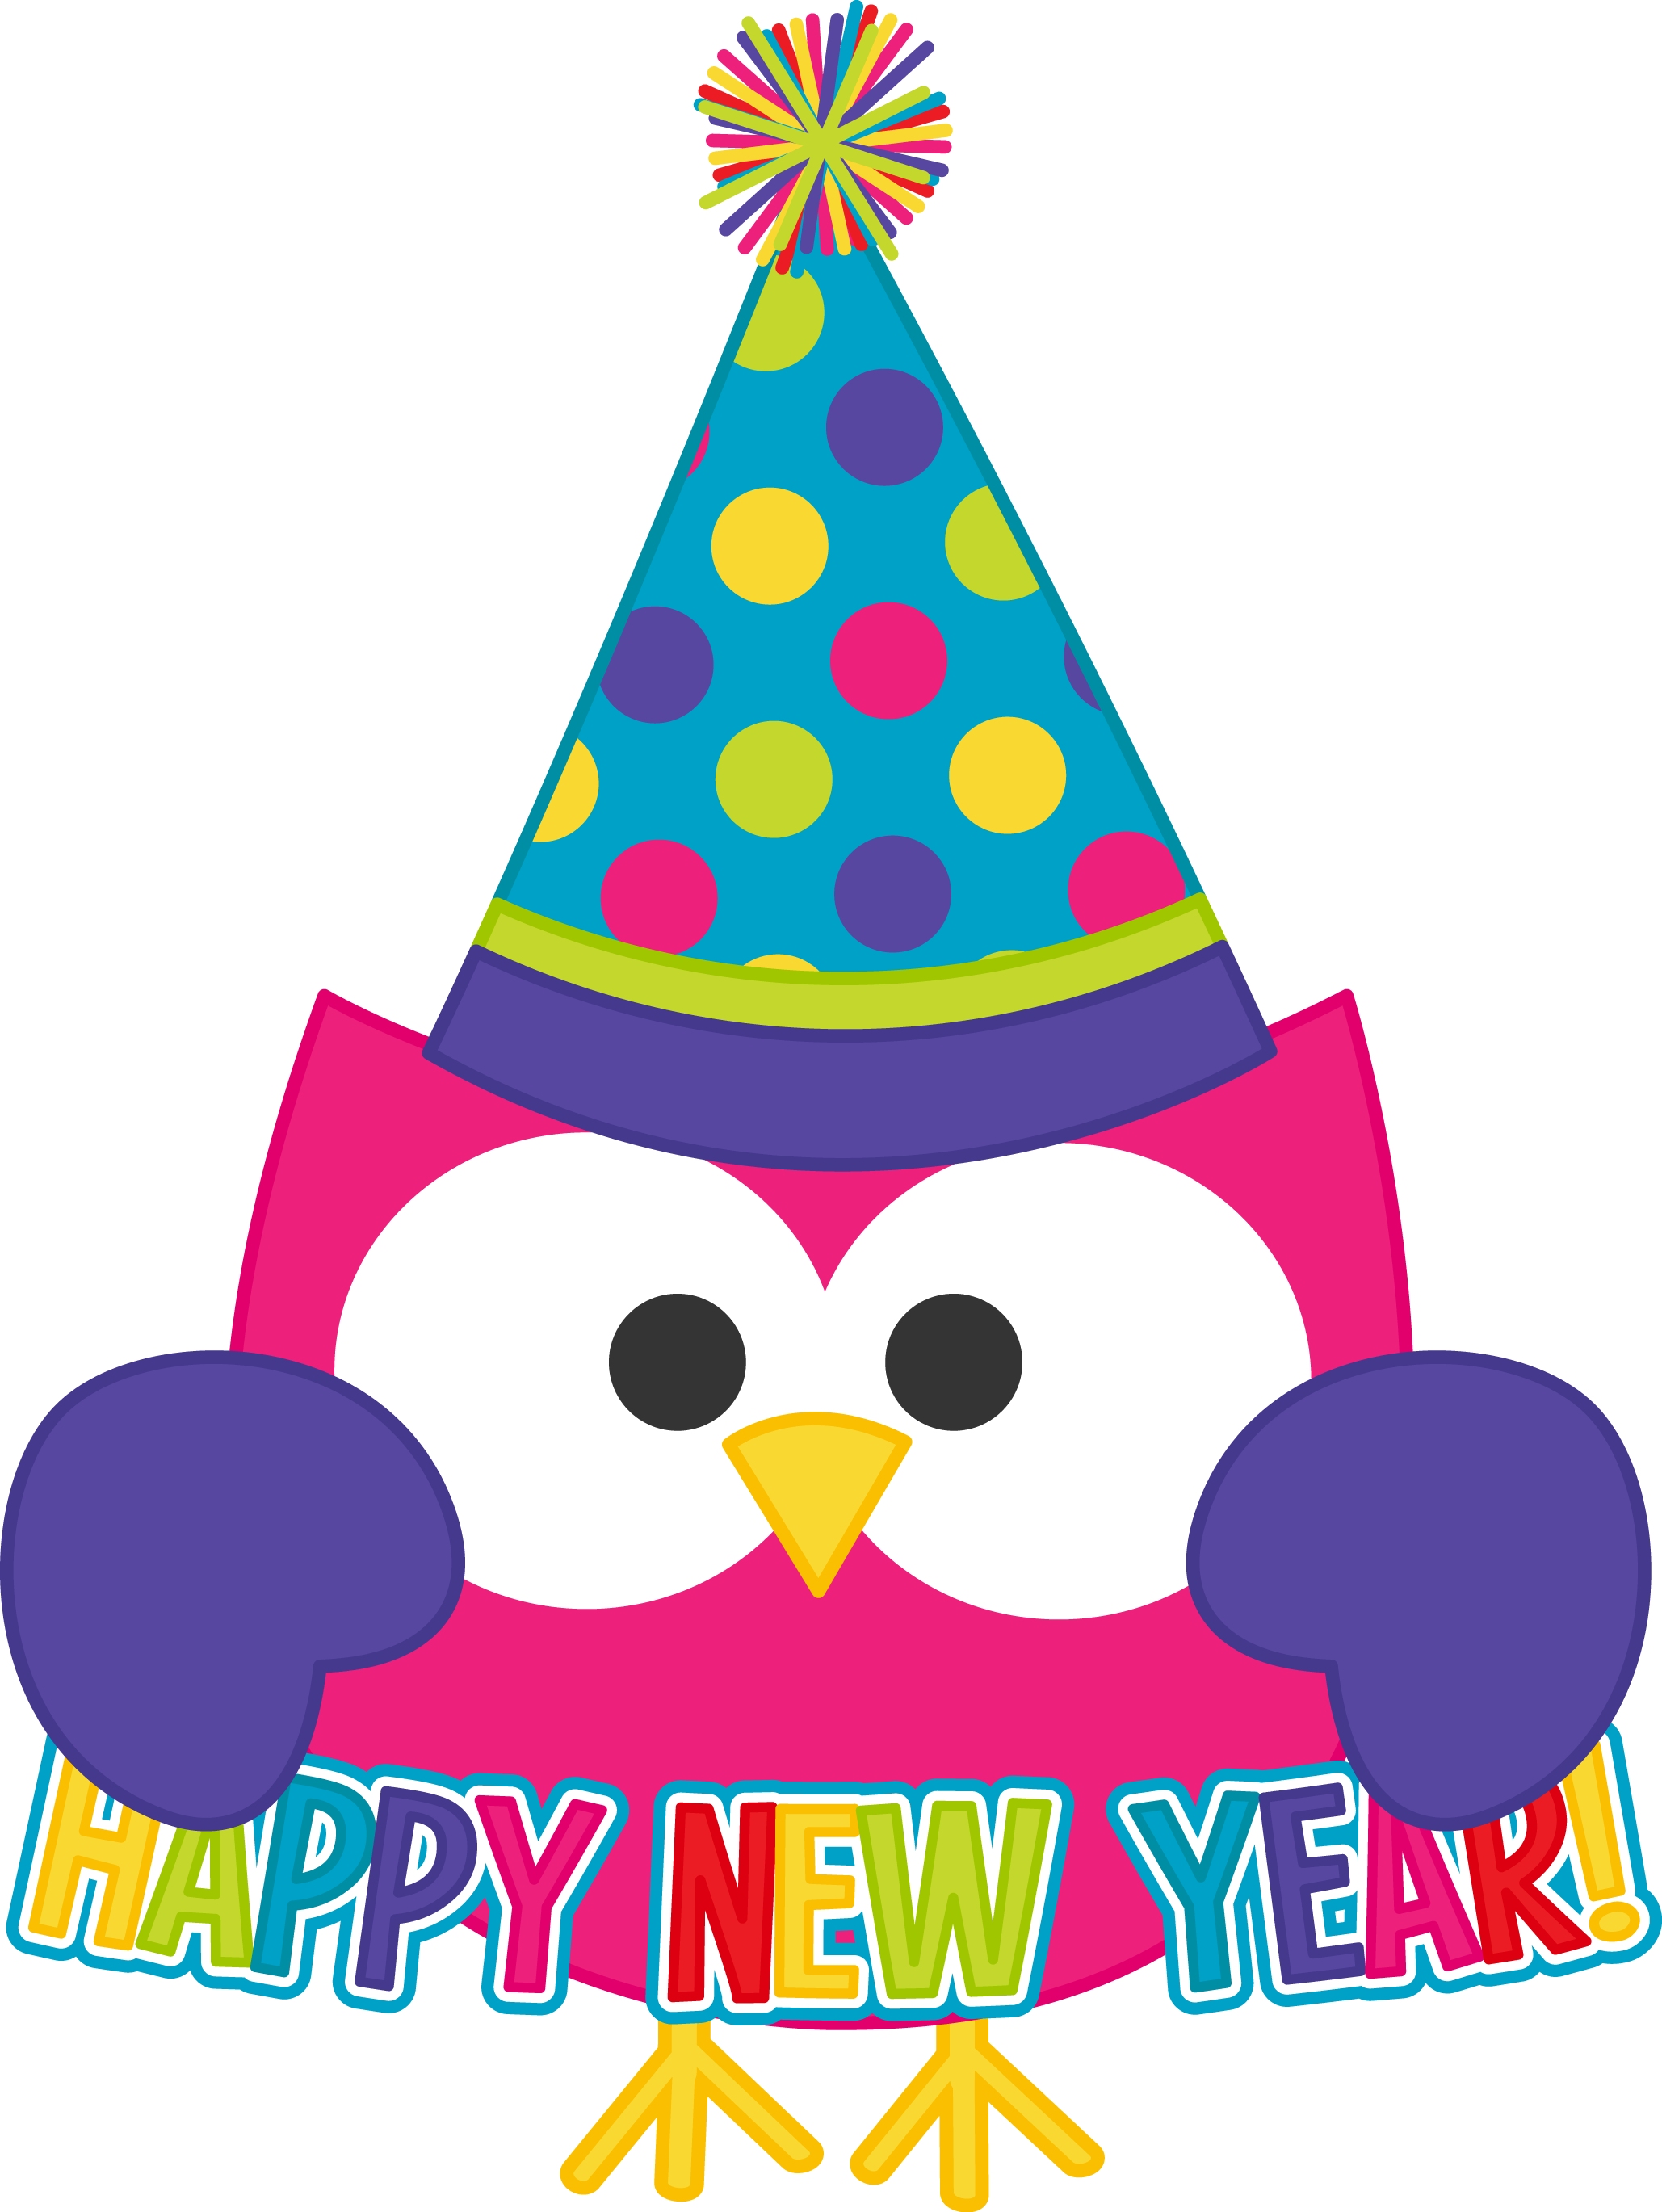 Free Happy New Year 2015 Clipart Images   Happy Holidays 2014